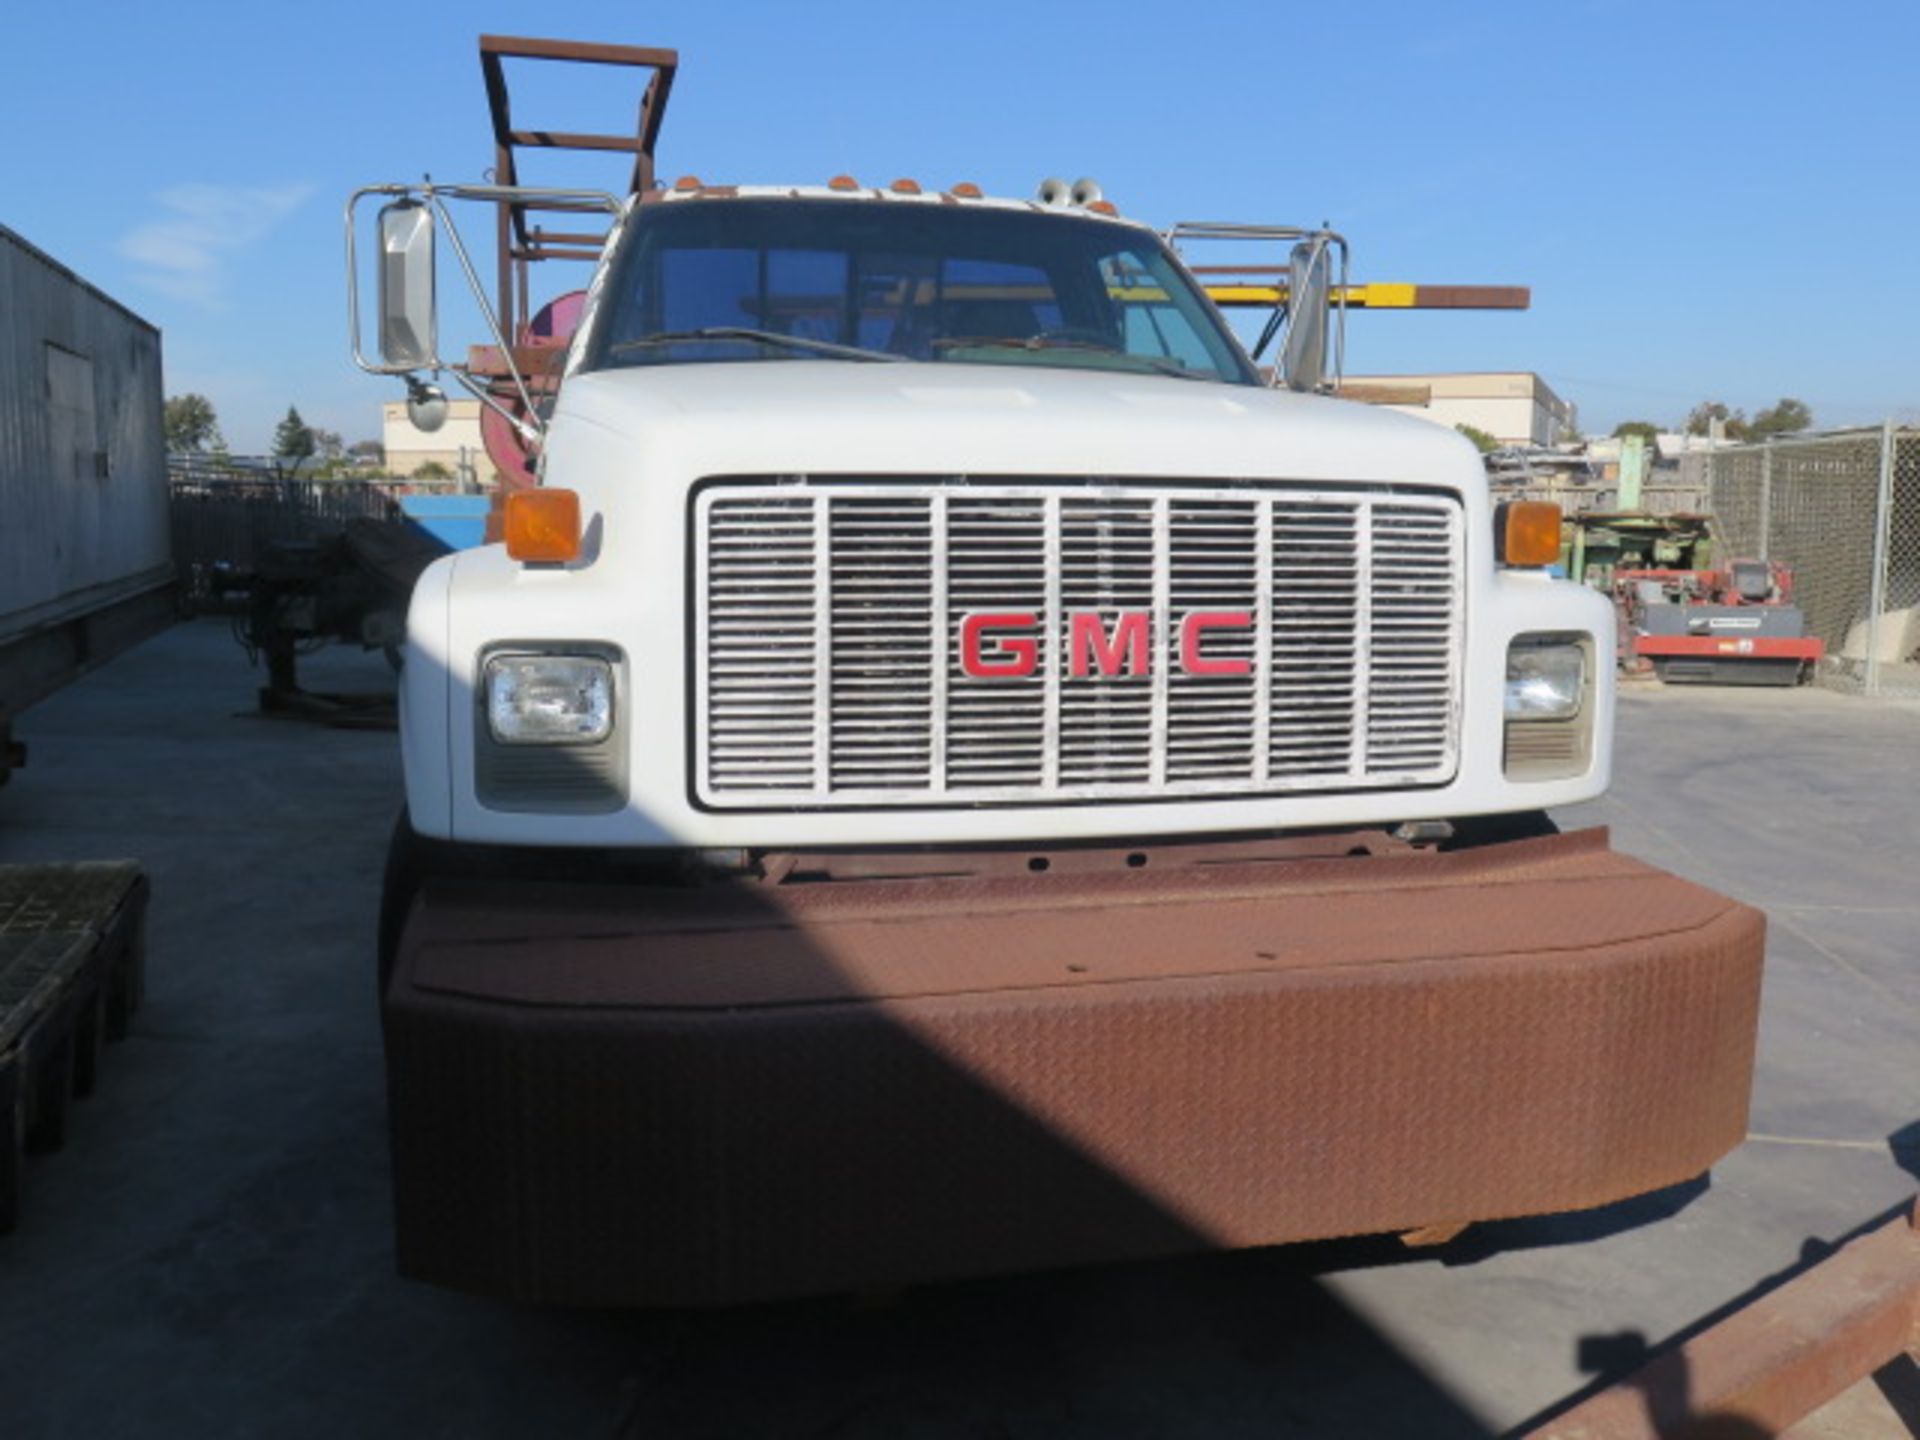 1992 GMC Top Kick Service Truck Lisc# 4J61885 w/ Caterpillar Diesel Engine, Automatic, SOLD AS IS - Image 3 of 24